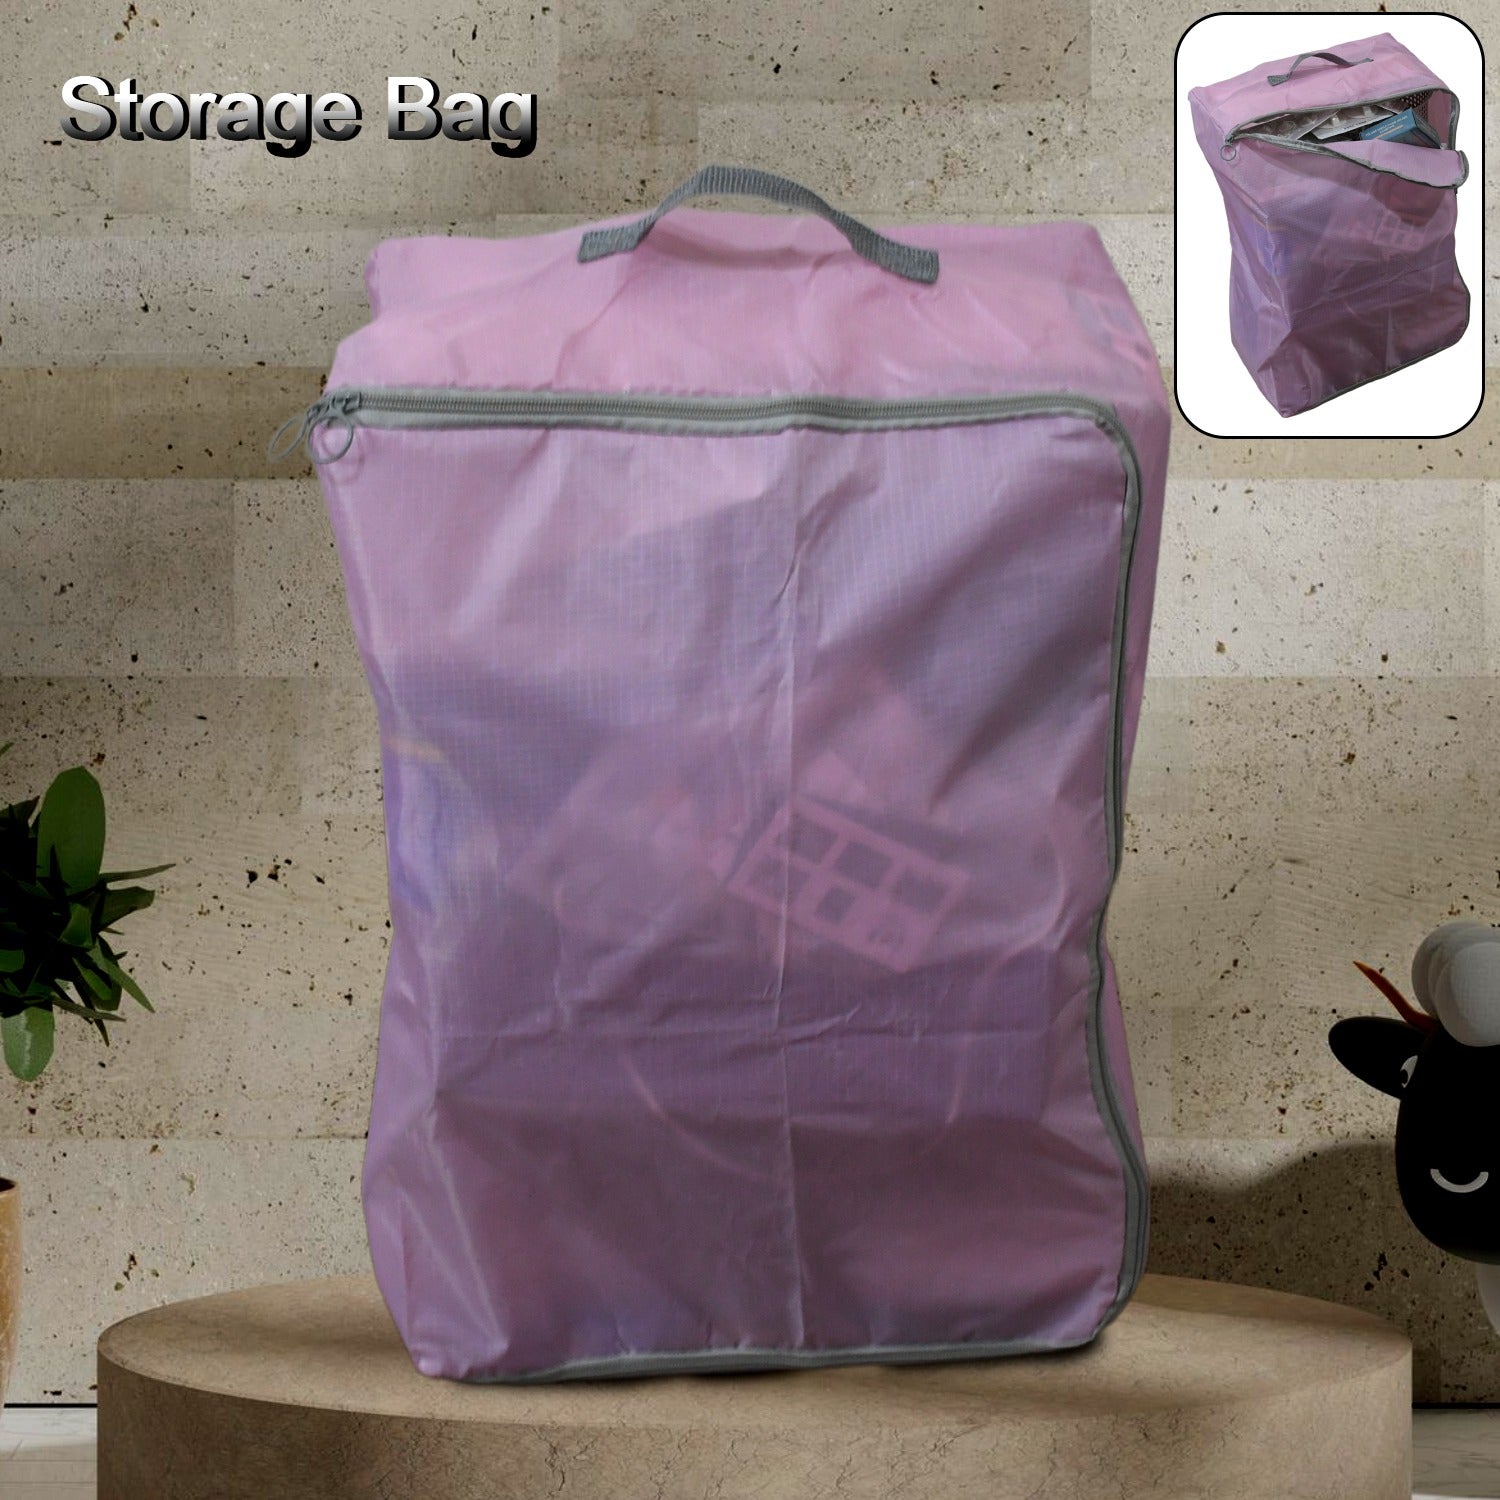 4313 Storage Bag with Zipper and Space Saver Comforter bag, Quilt, Bedding, Clothes, Blanket Storage Organizer Bag with Carry Handles for Closet Waterproof Fabric Garment Bag